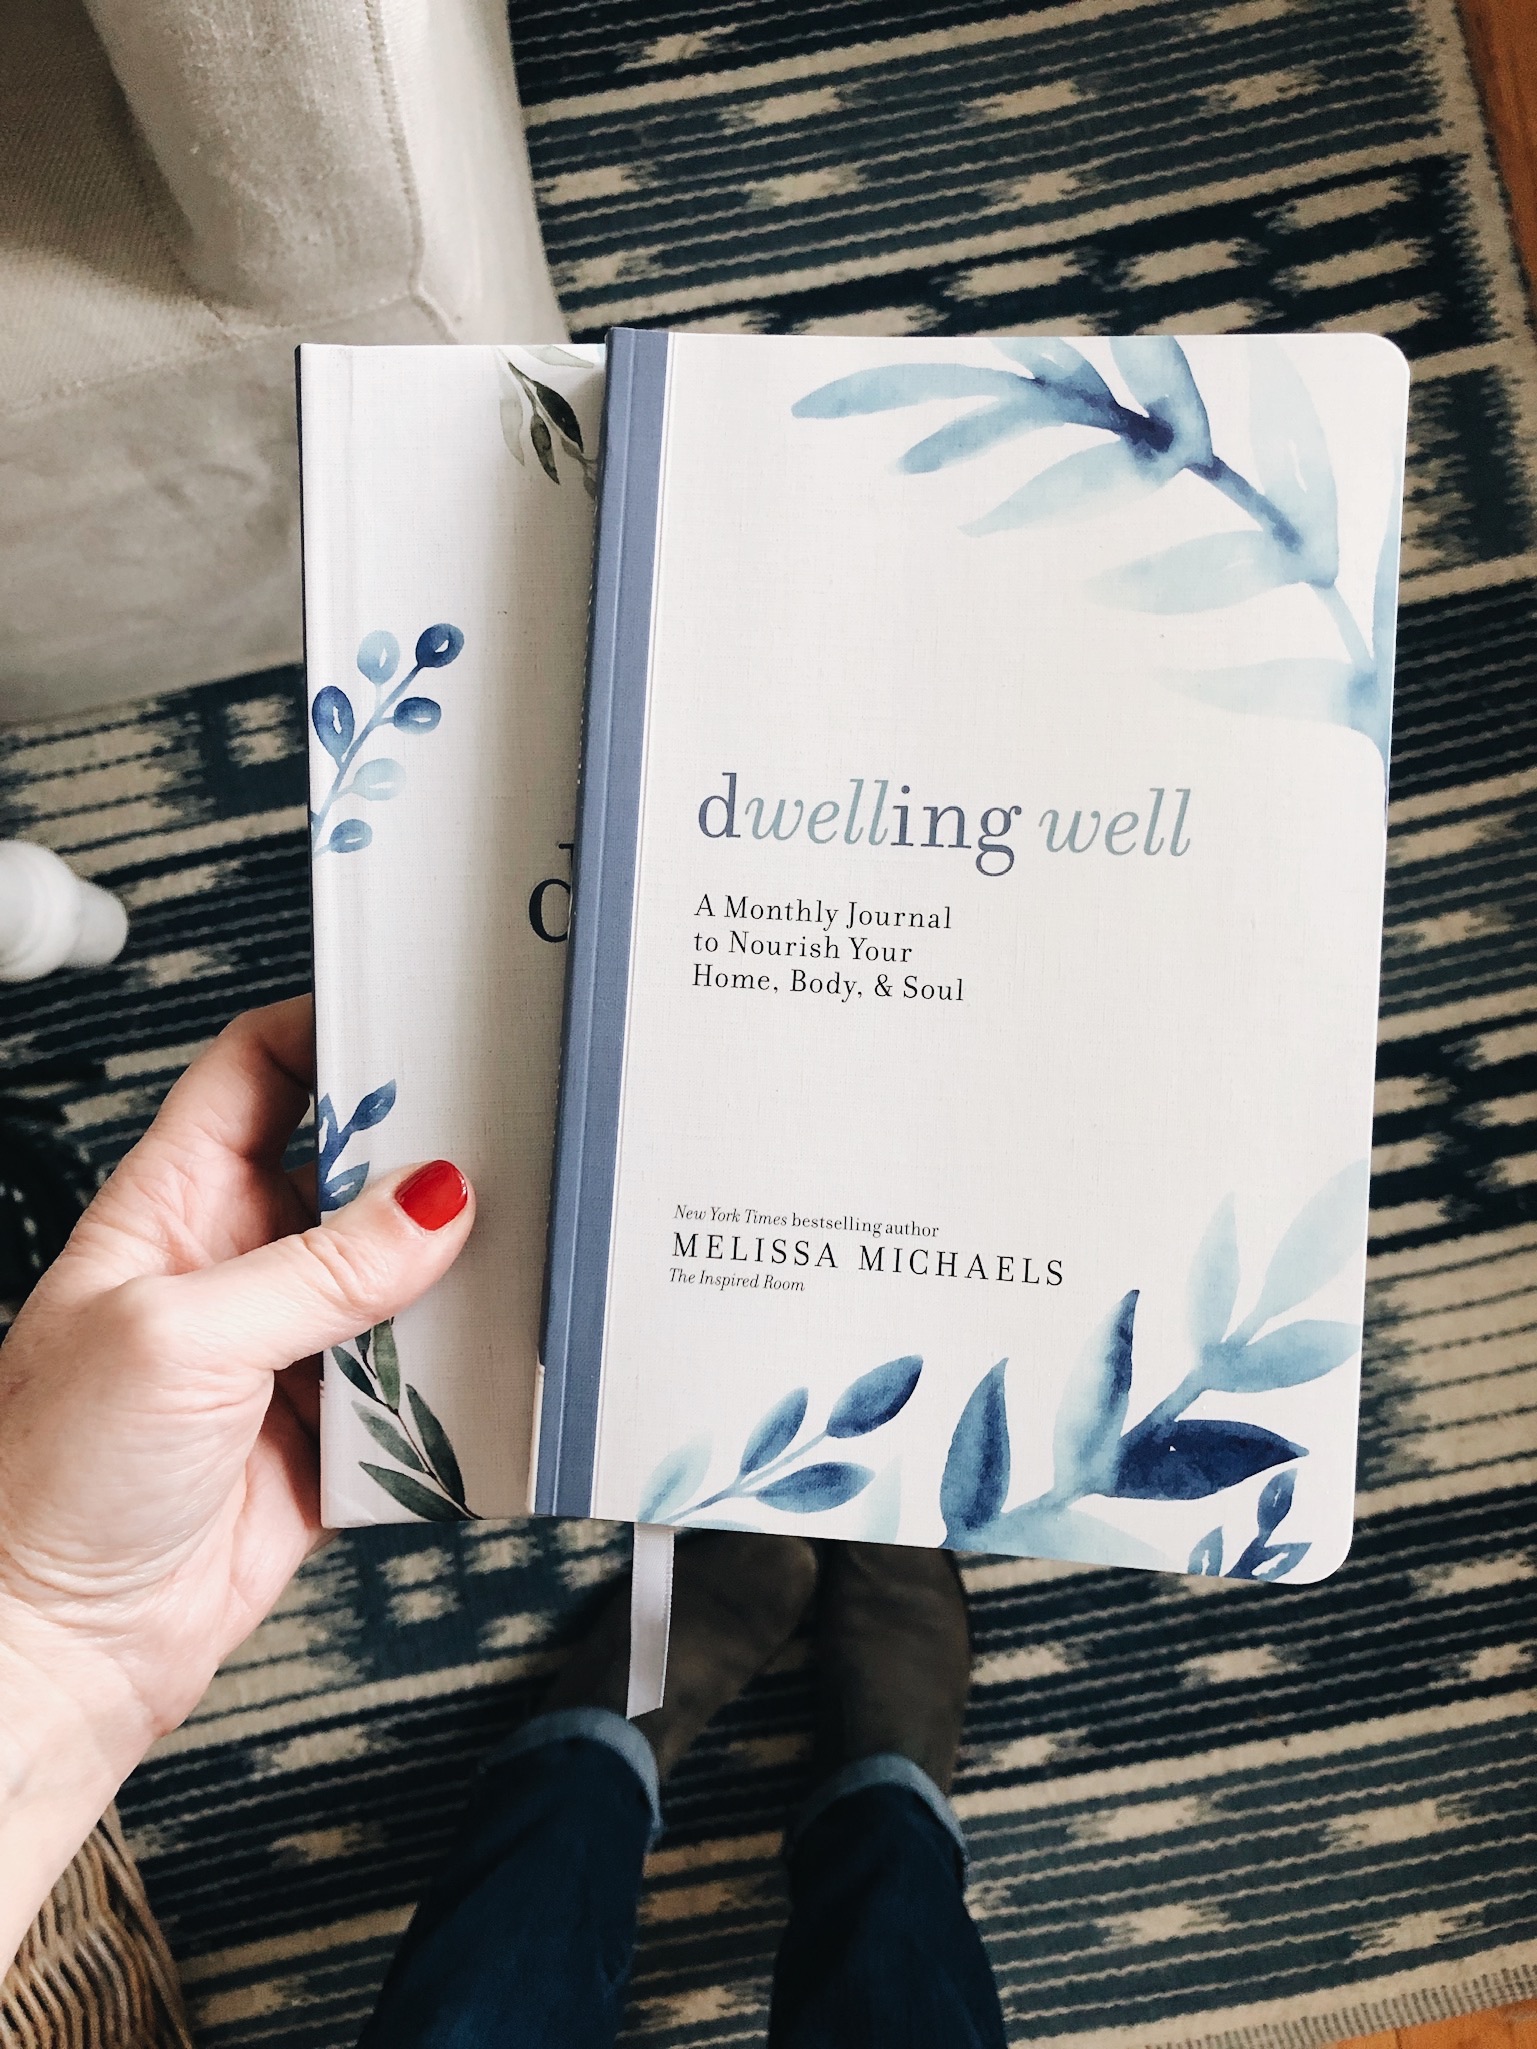 A Year of Dwelling Well (an invitation for 2020!)